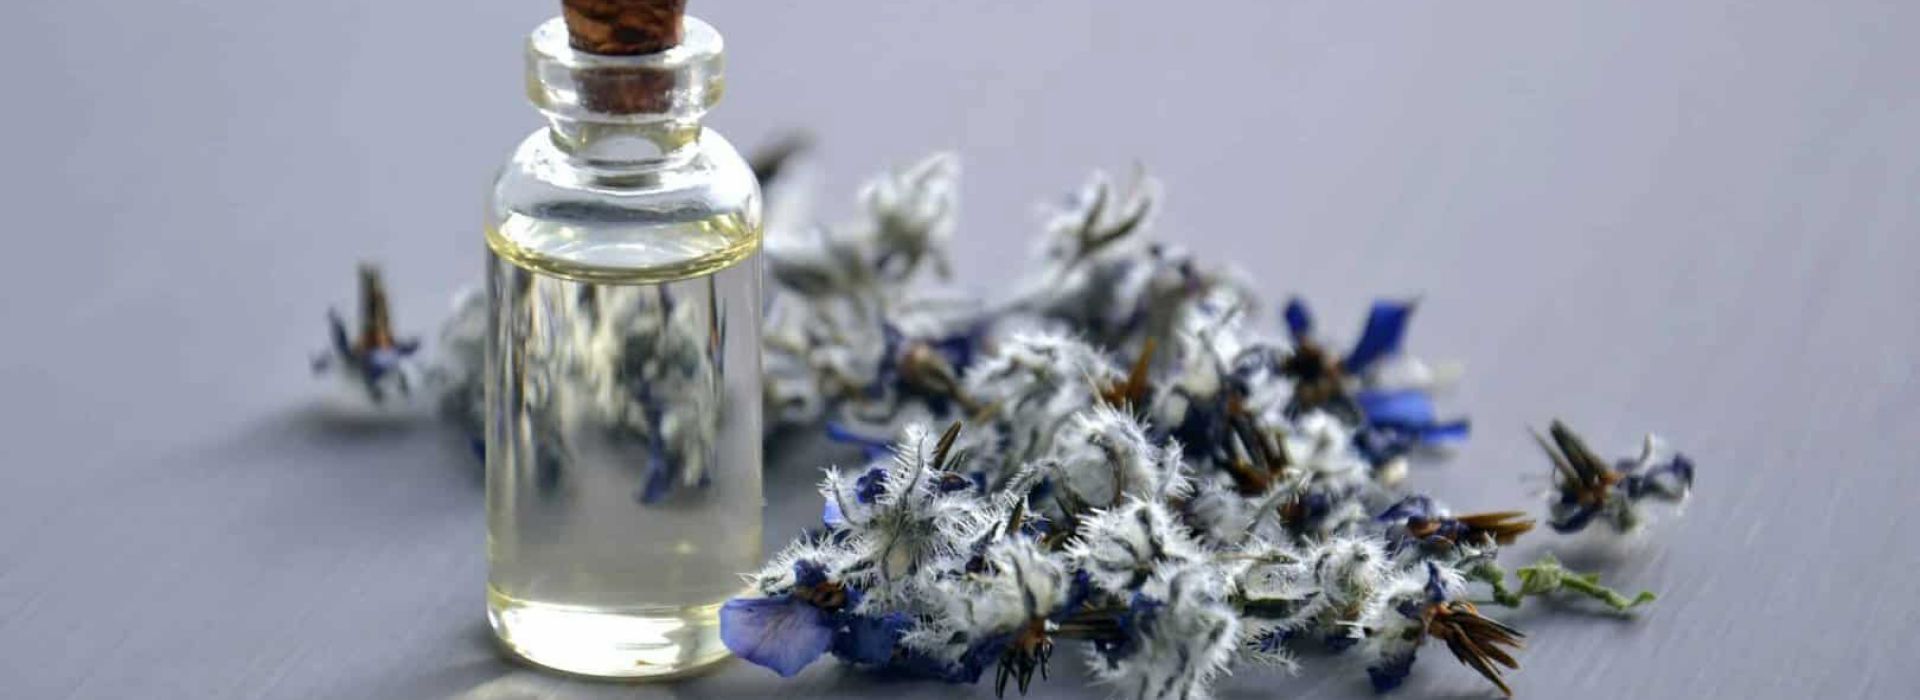 Using Aromatherapy in Addiction Treatment